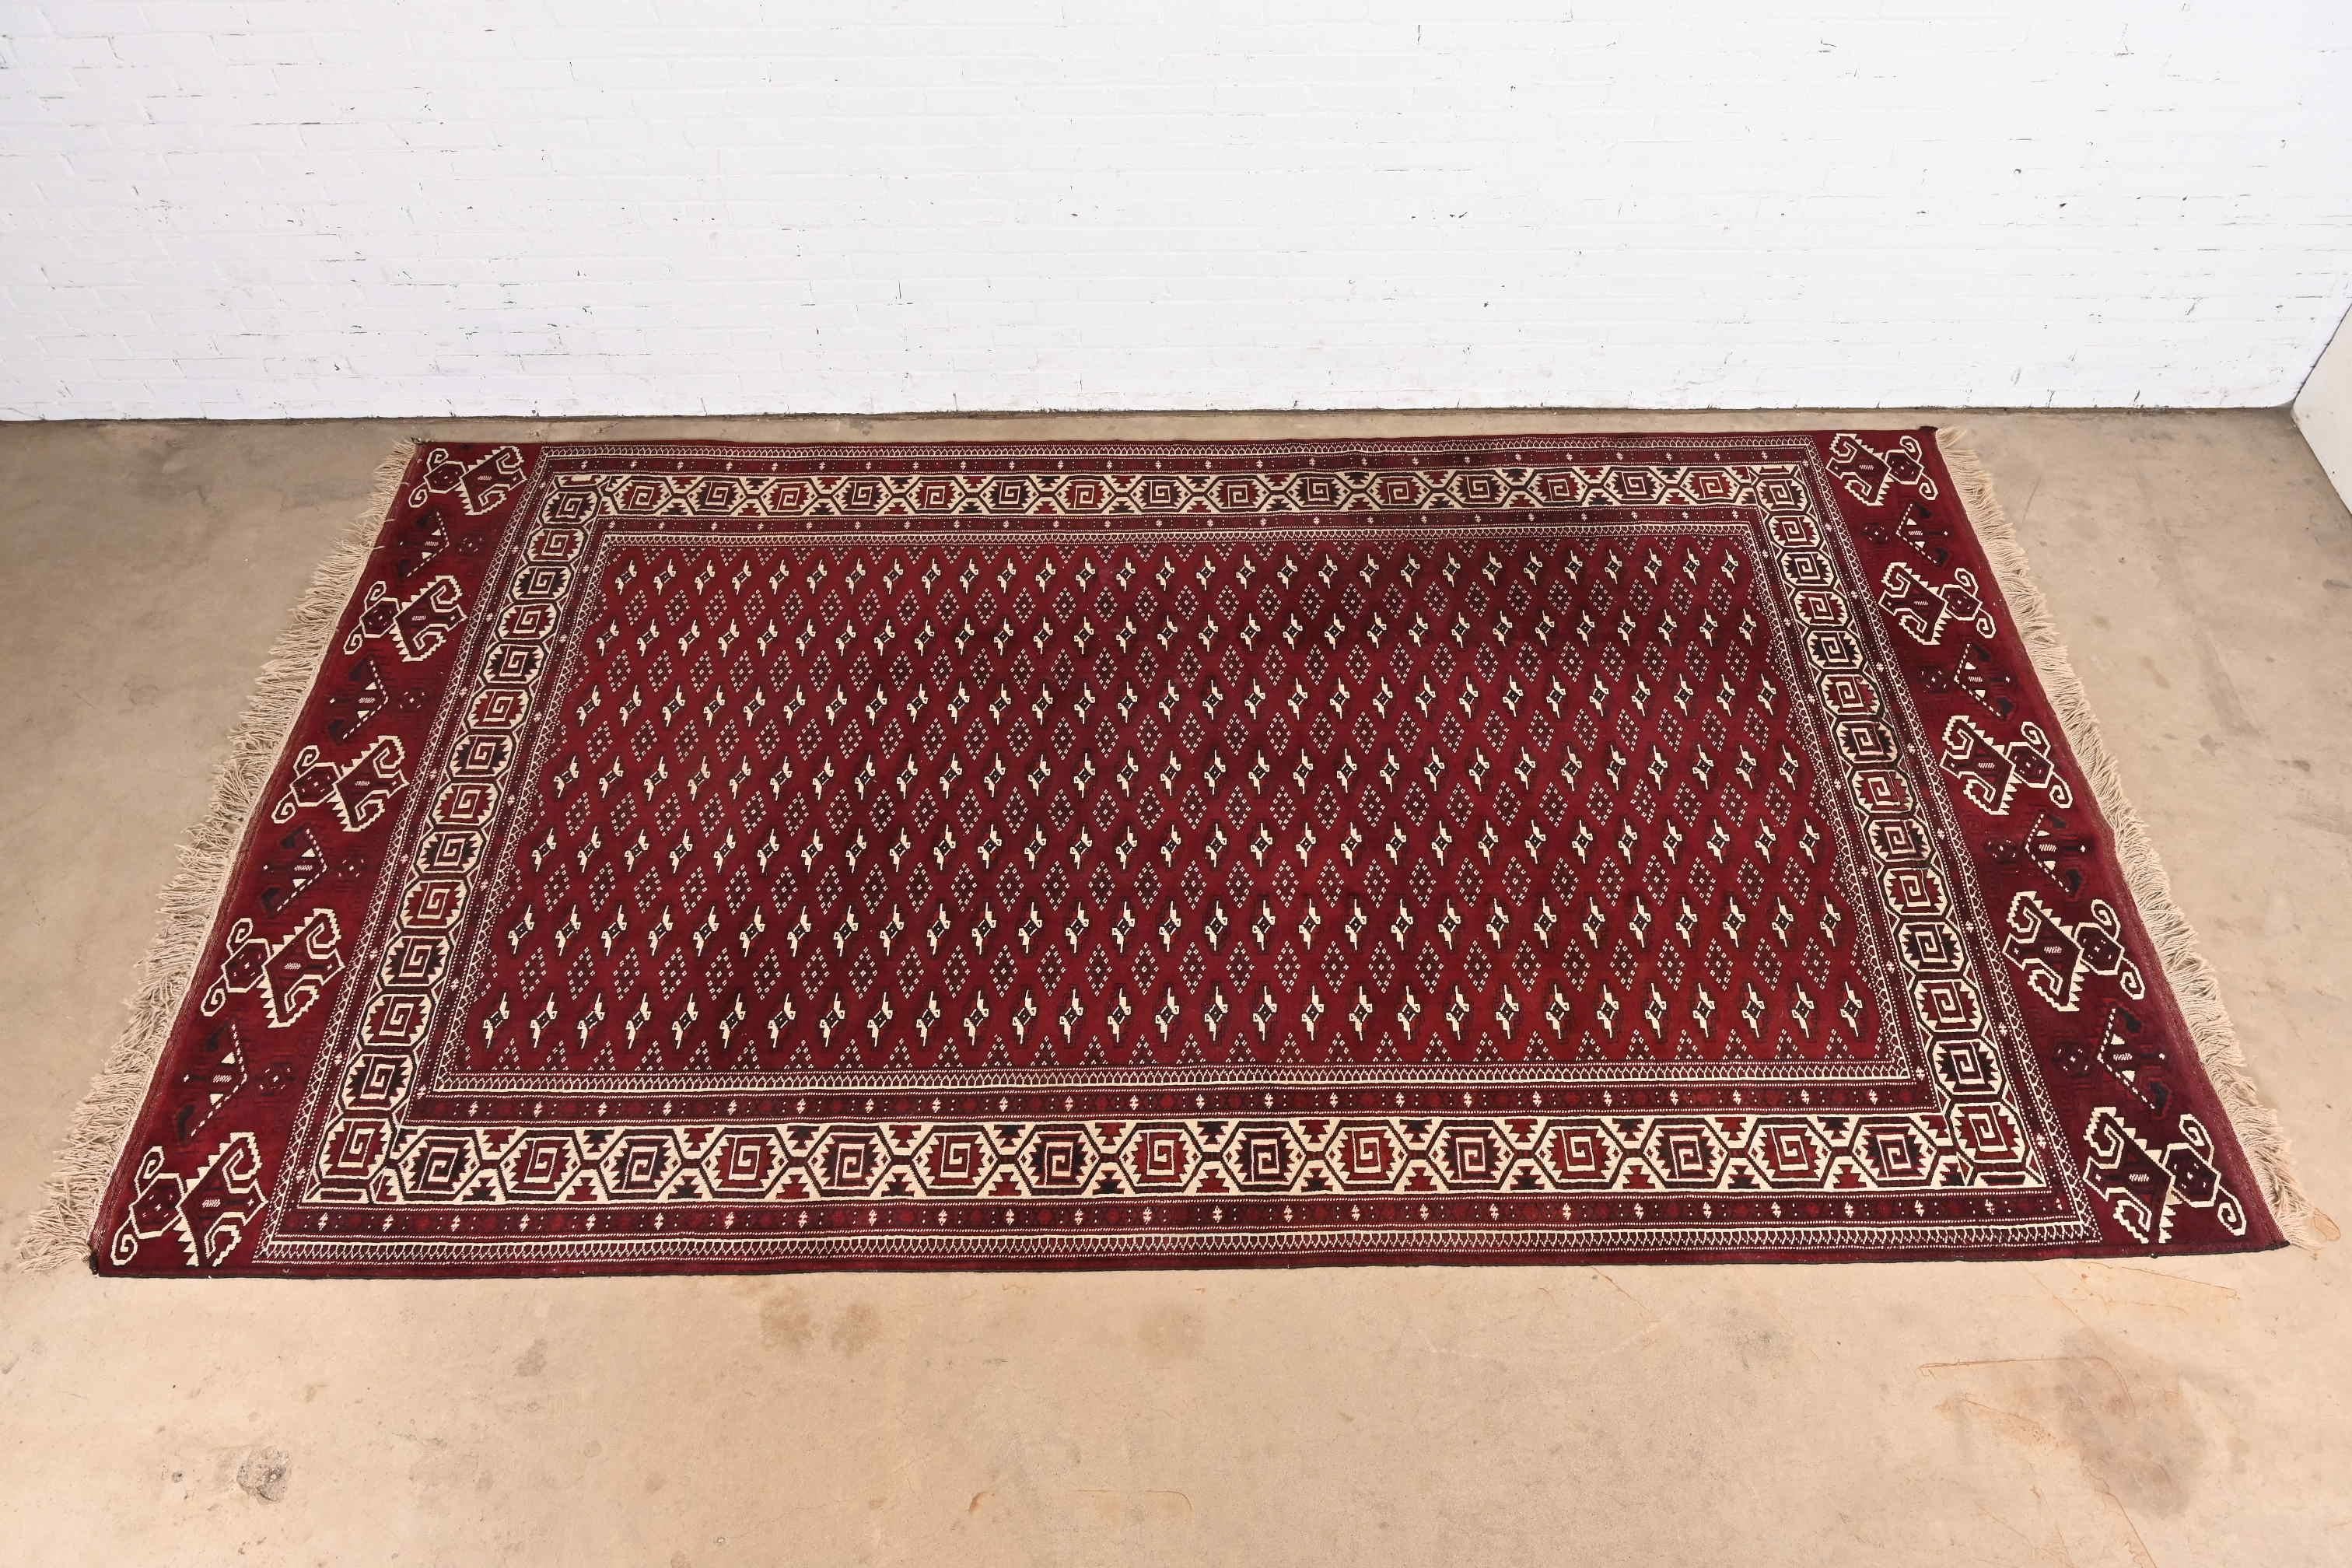 A gorgeous Mid-Century Modern hand-woven tribal Persian Bokhara room size wool rug

Mid-20th Century

Beautiful geometric design, with predominant colors in burgundy, ivory, and black.

Measures: 7'3